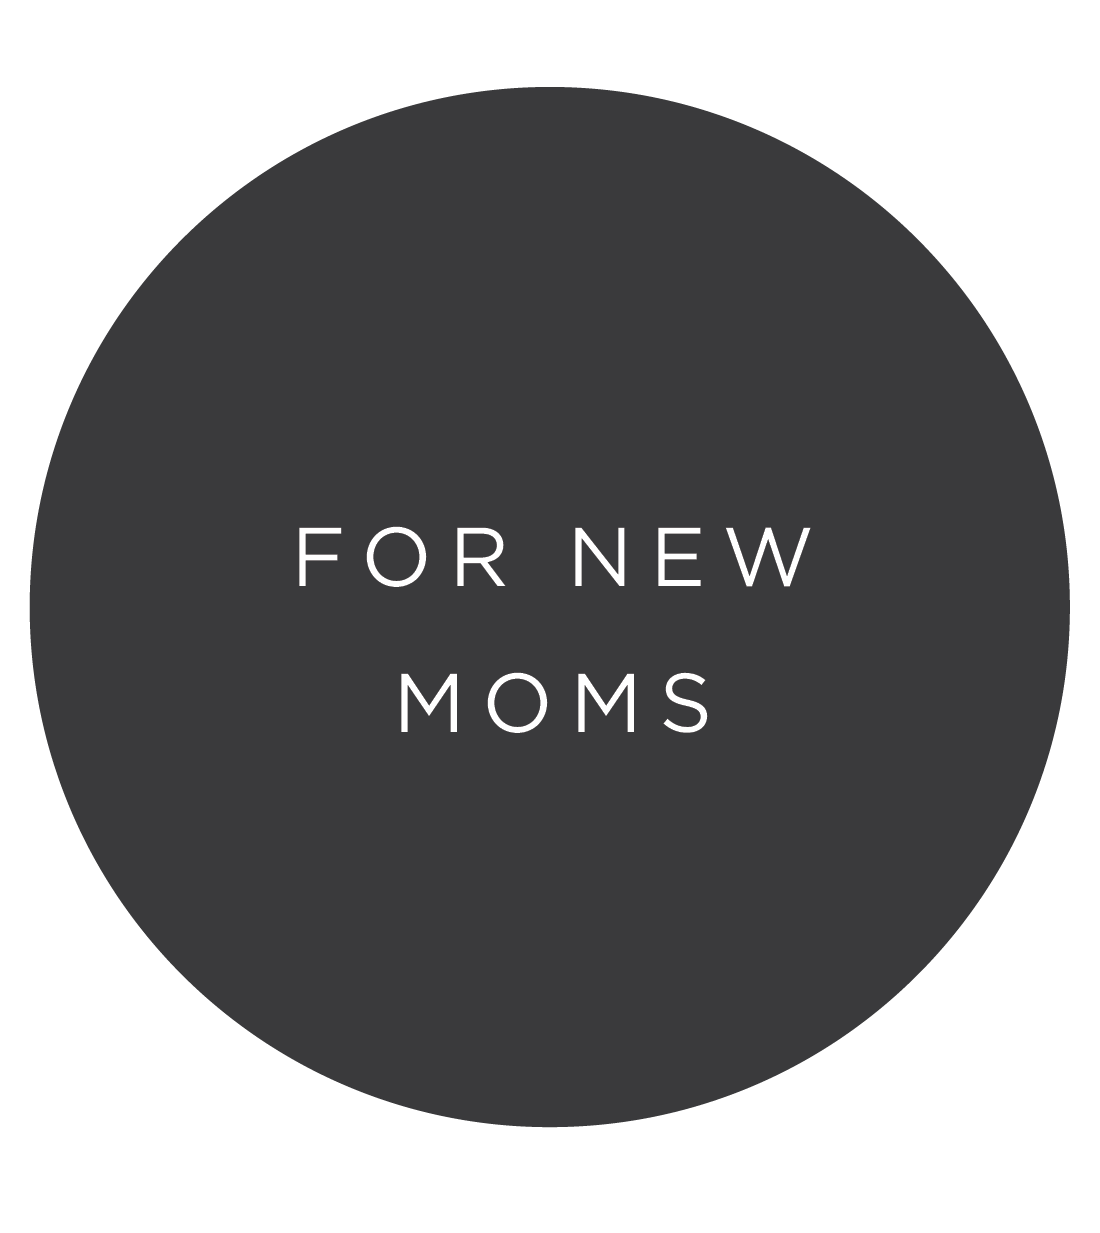 FOR NEW MOMS